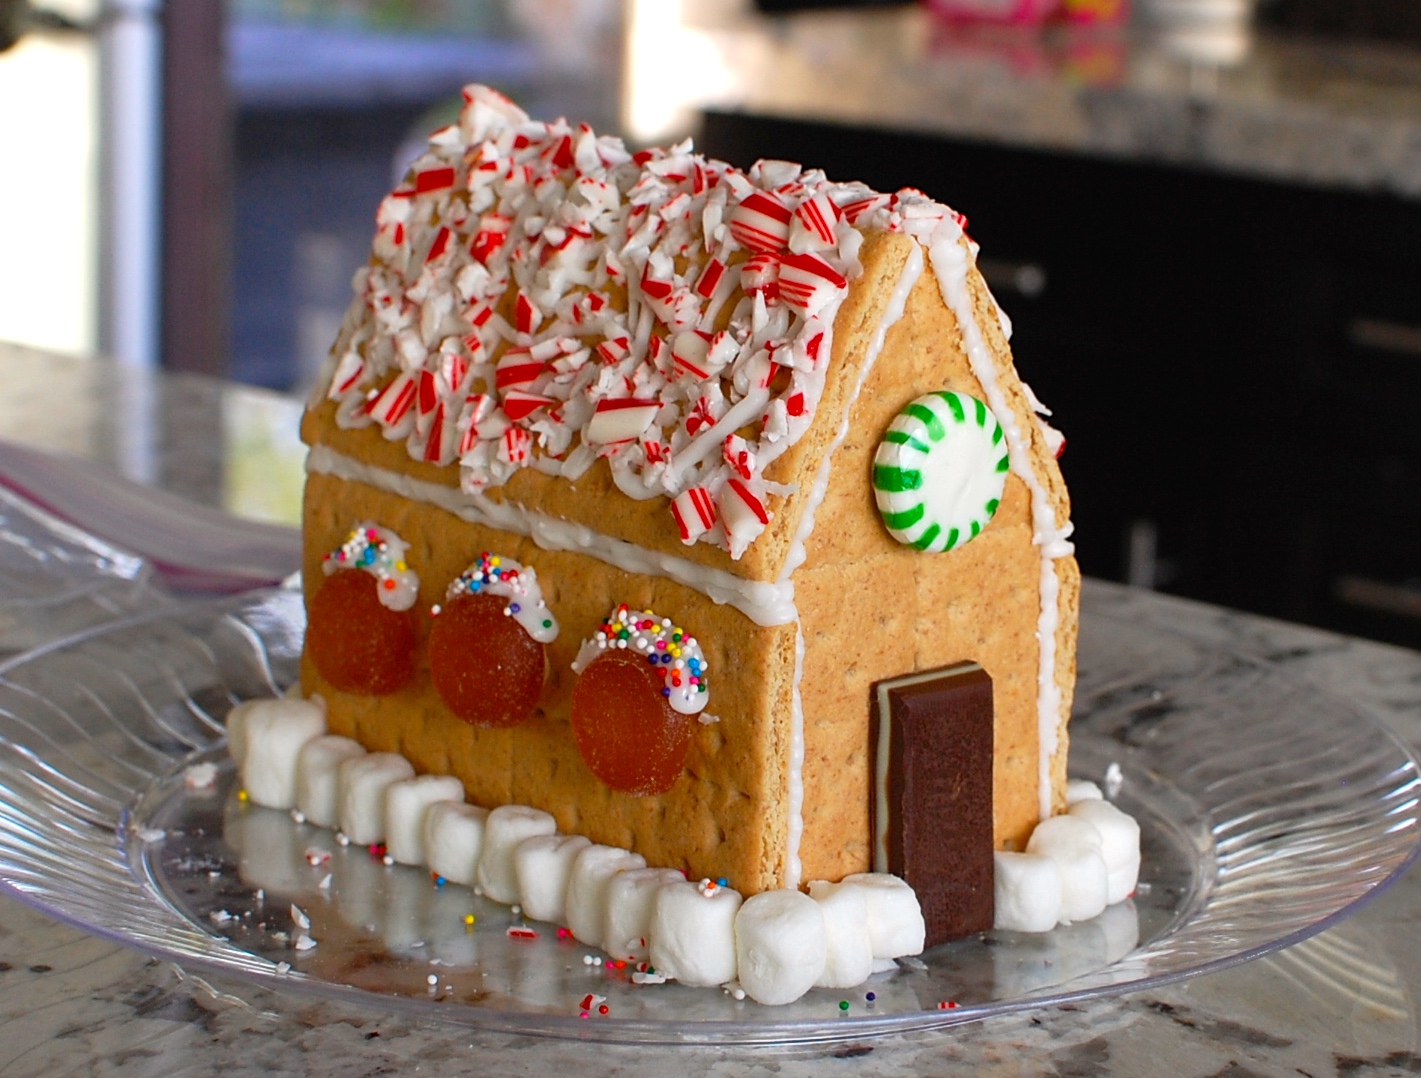 How to make a Gingerbread House from Graham Crackers — The 350 Degree Oven